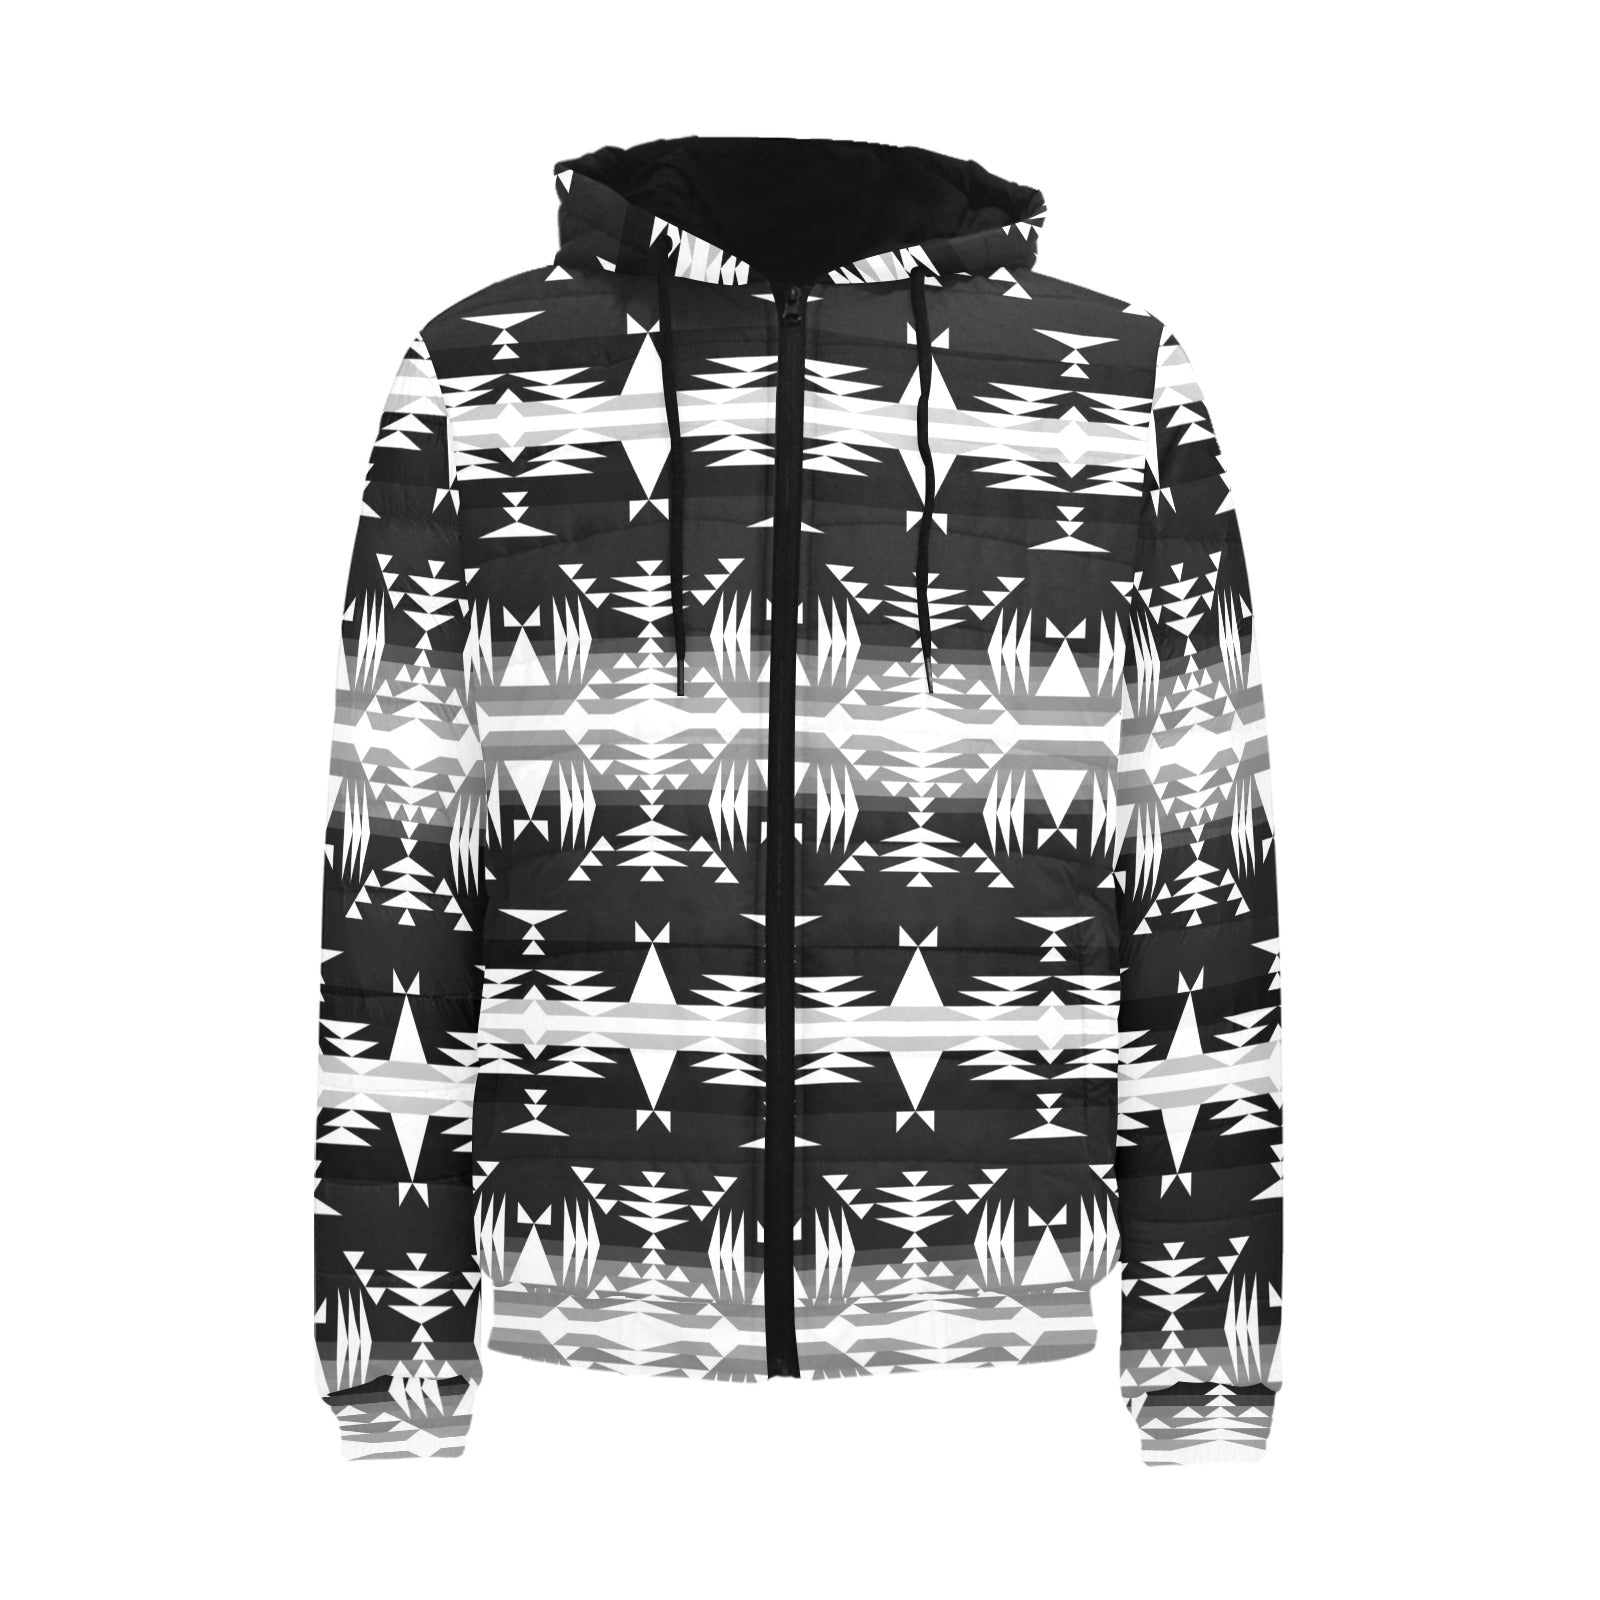 Between the Mountains Black and White Men's Padded Hooded Jacket